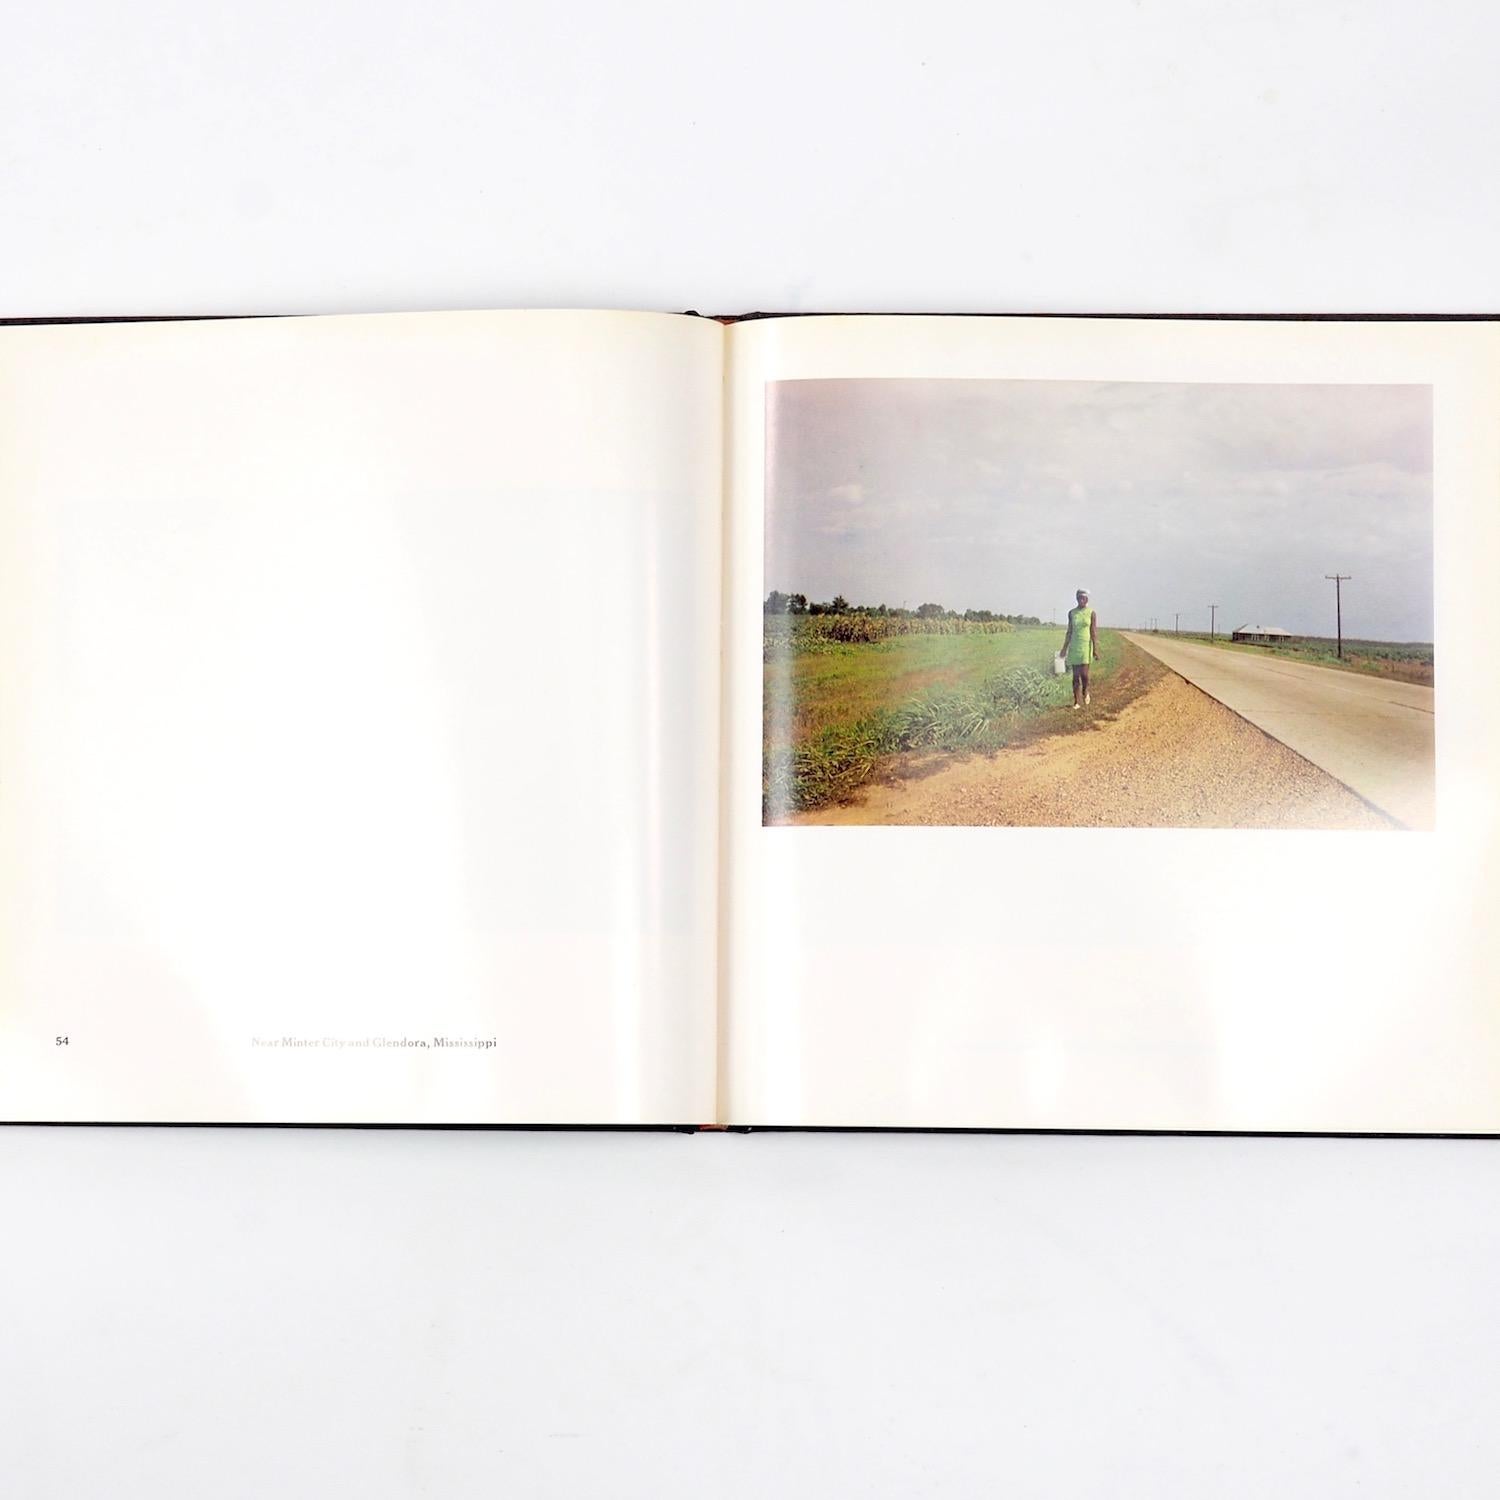 First Edition, published by Museum of Modern Art, New York, and The MIT Press, Massachusetts, 1976. 

This first edition of this groundbreaking book, cited by photographic historian Andrew Roth as one of the 101 most influential photography books of